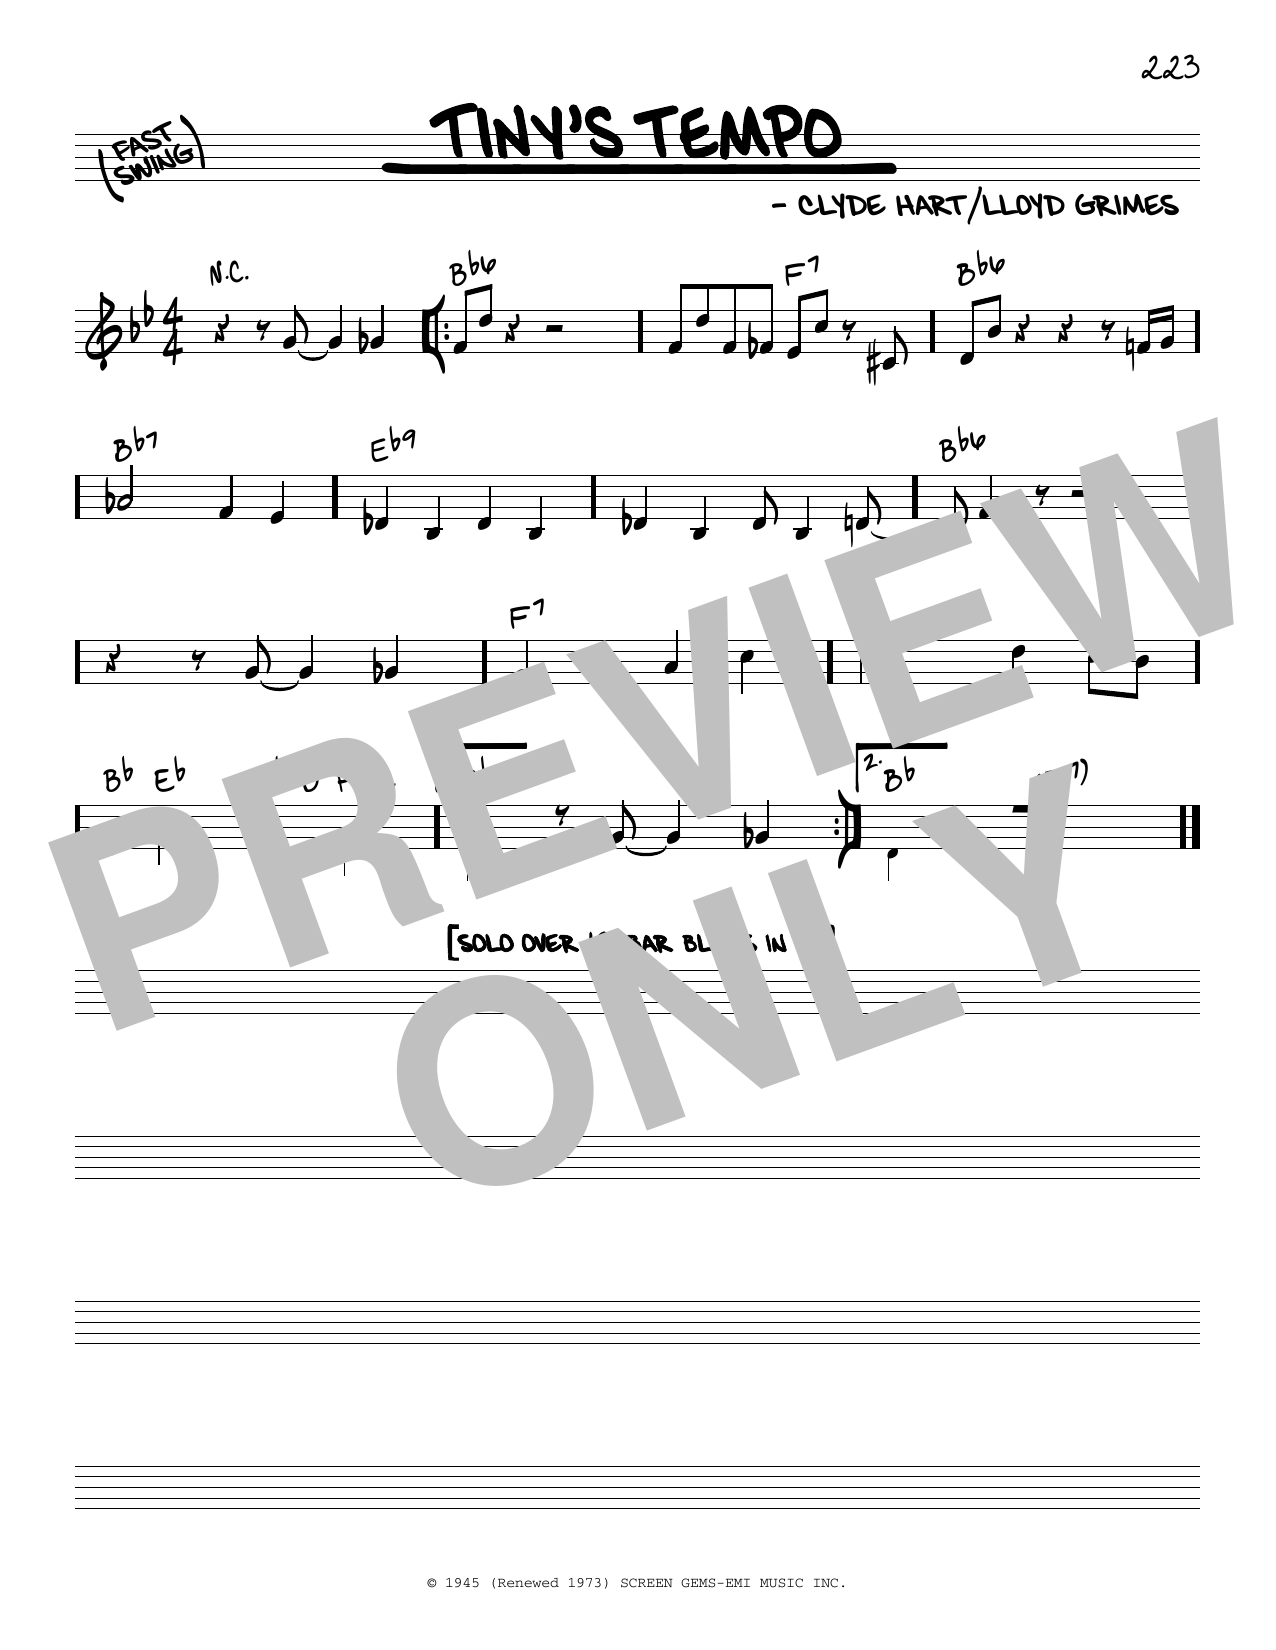 Download Lloyd Grimes Tiny's Tempo Sheet Music